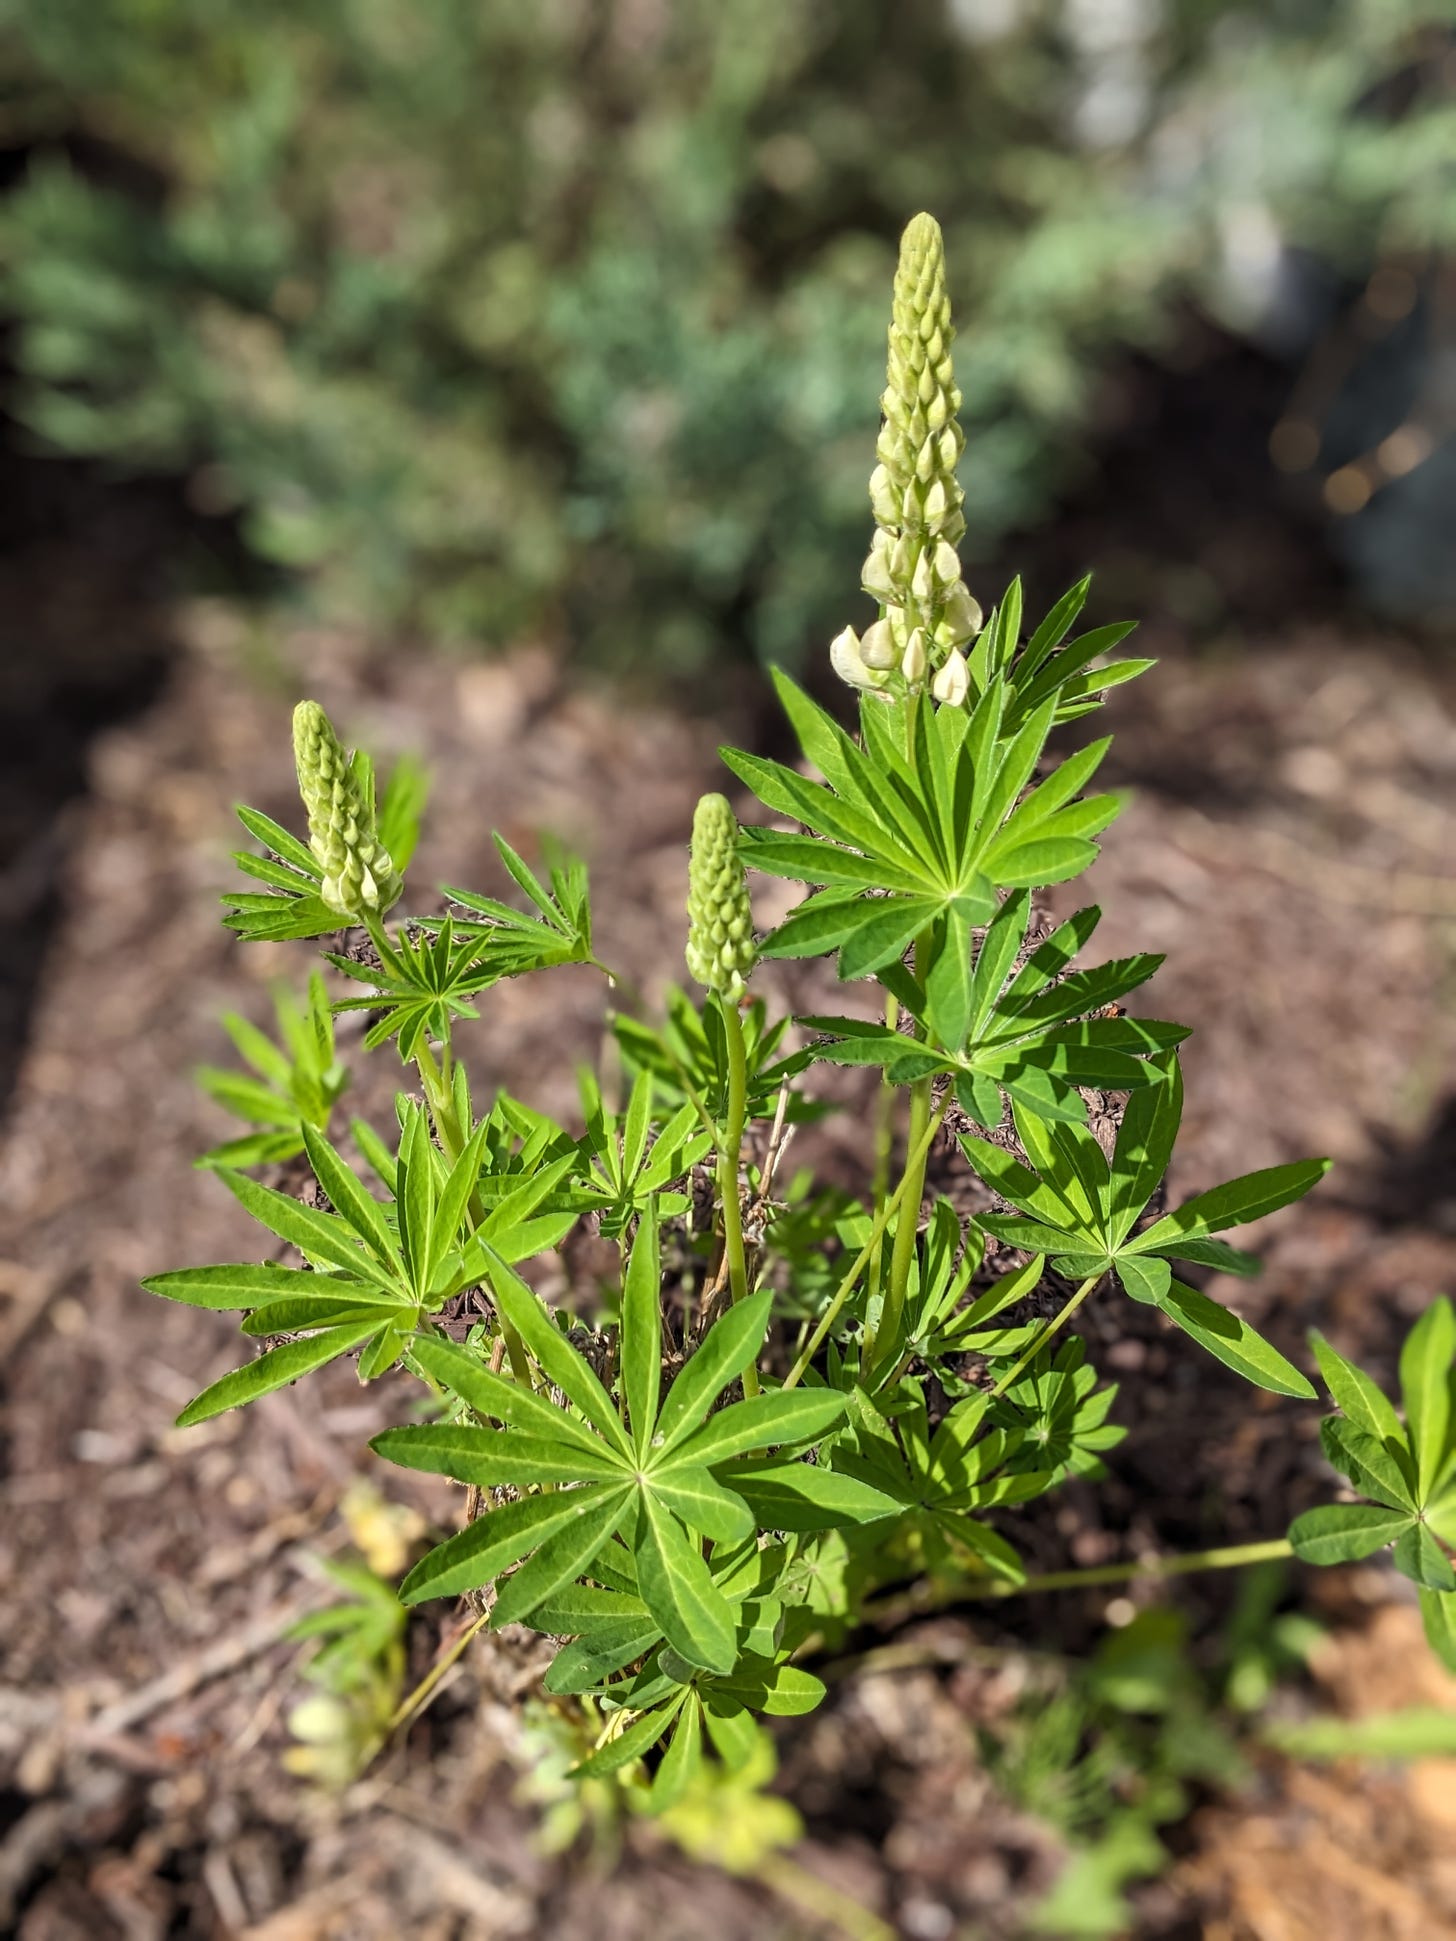 closeup photo of a lupine plant. three tall green stalks are topped with a tower-like arrangement of flower petals. the leaves of the plant are thin and many, spread out in a circle around a central point. a different blurry green evergreen tree can be seen in the background, both plants above brown mulch